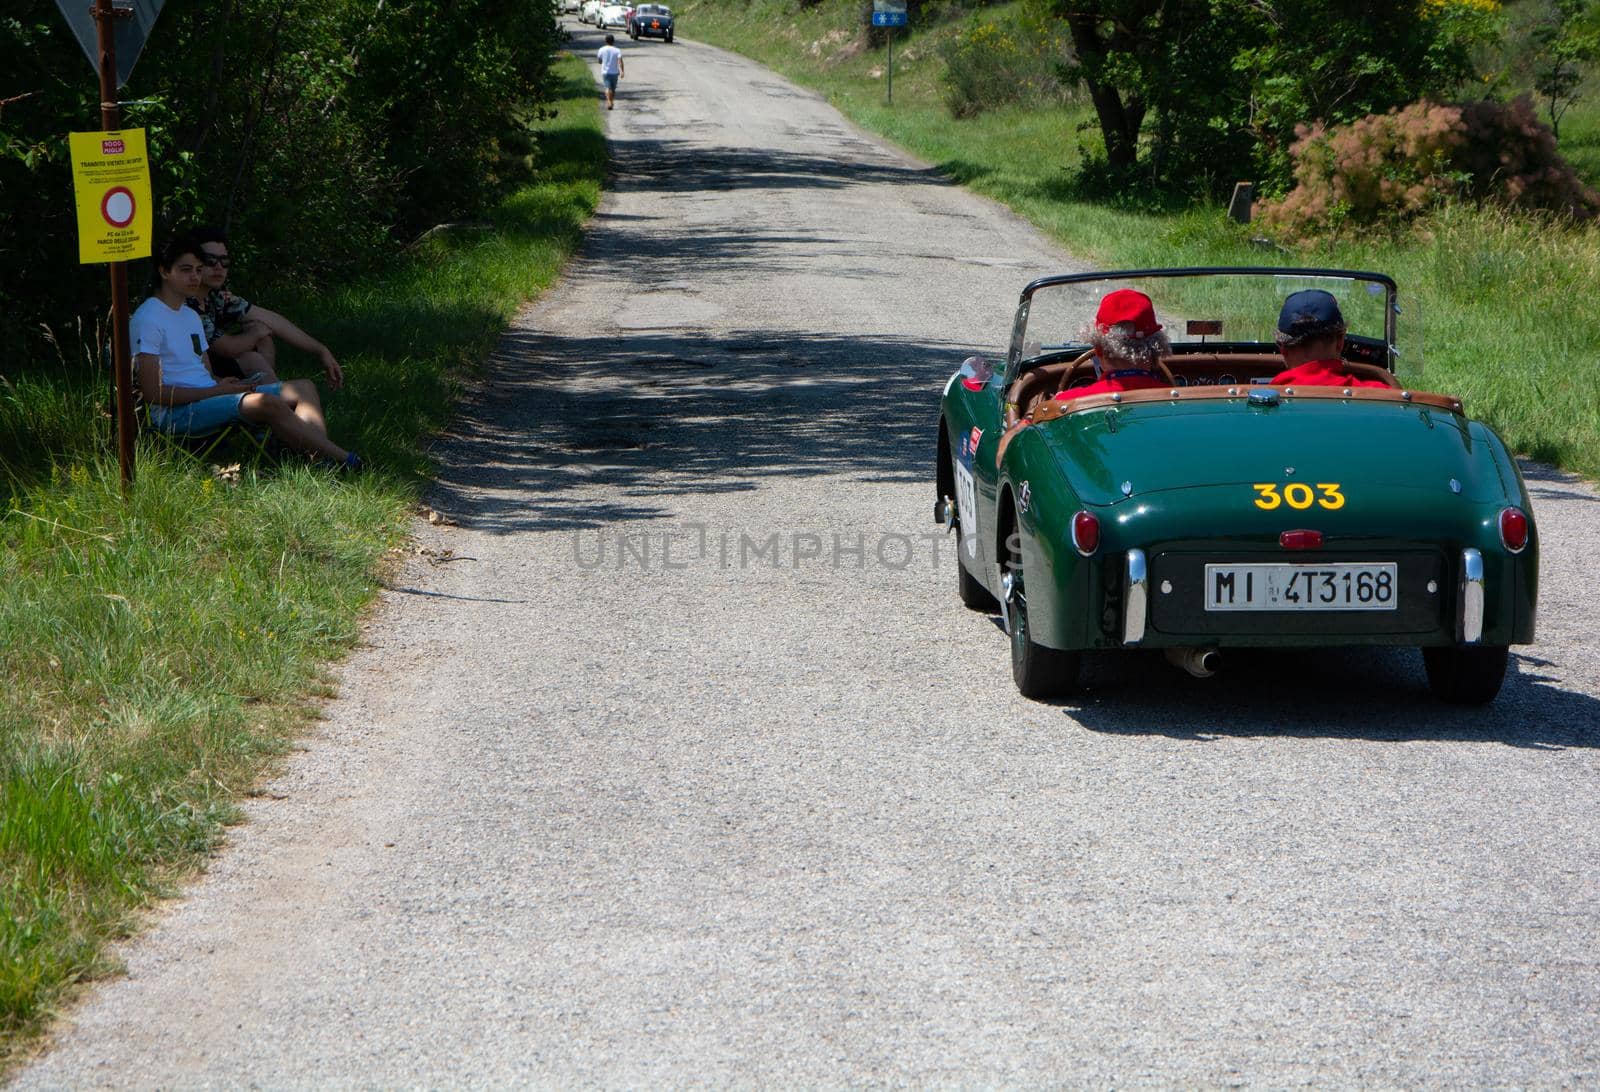 TRIUMPH TR2 SPORTS 1954 on an old racing car in rally Mille Miglia 2022 the famous italian historical race (1927-1957 by massimocampanari